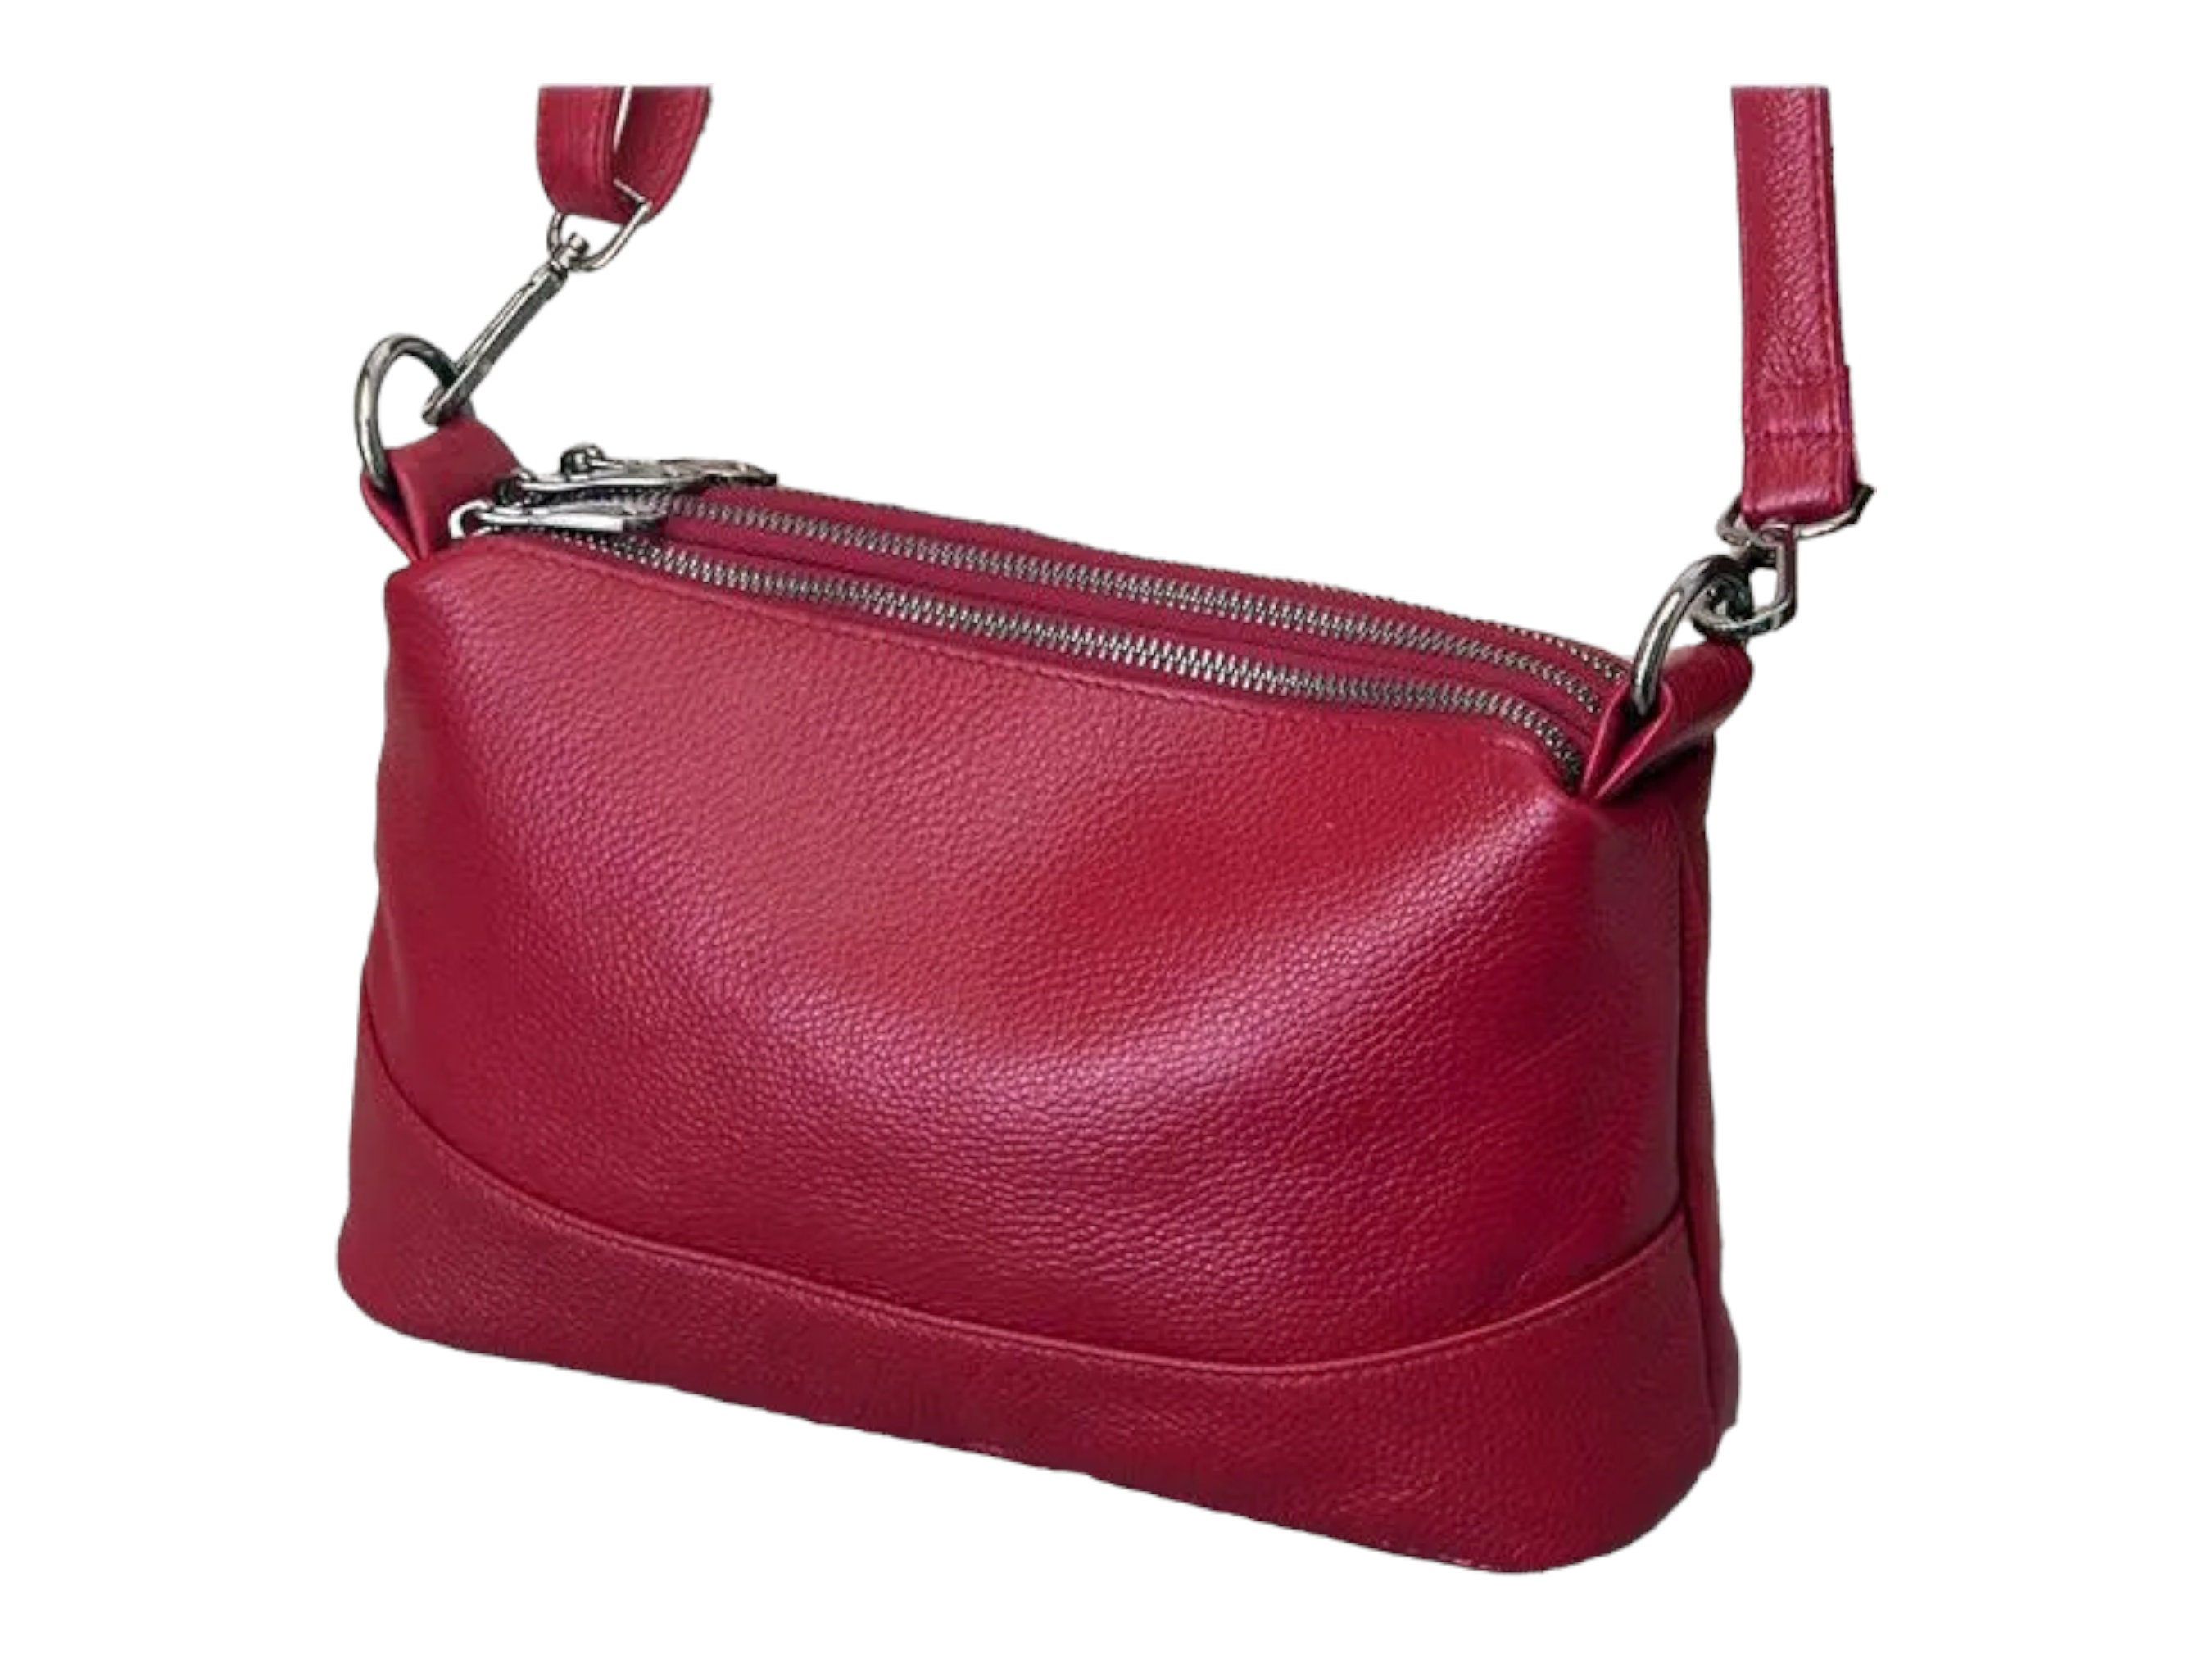 Red Leather Women's Crossbody Bag or Shoulder Bag, 5 Colors Choices ...